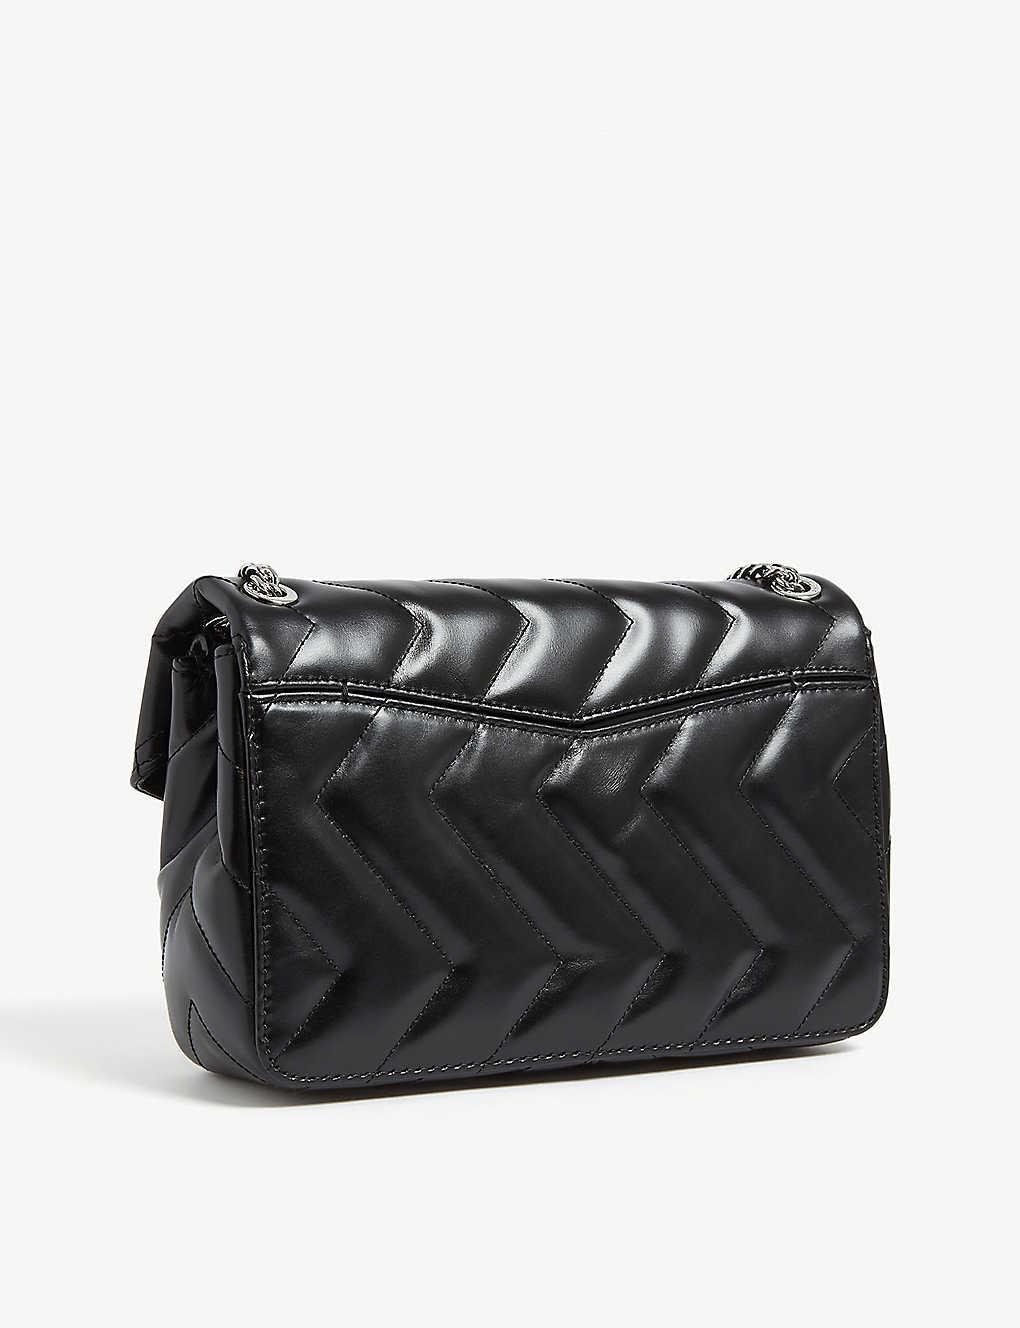 Sandro Yza Quilted Leather Shoulder Bag in Black - Lyst